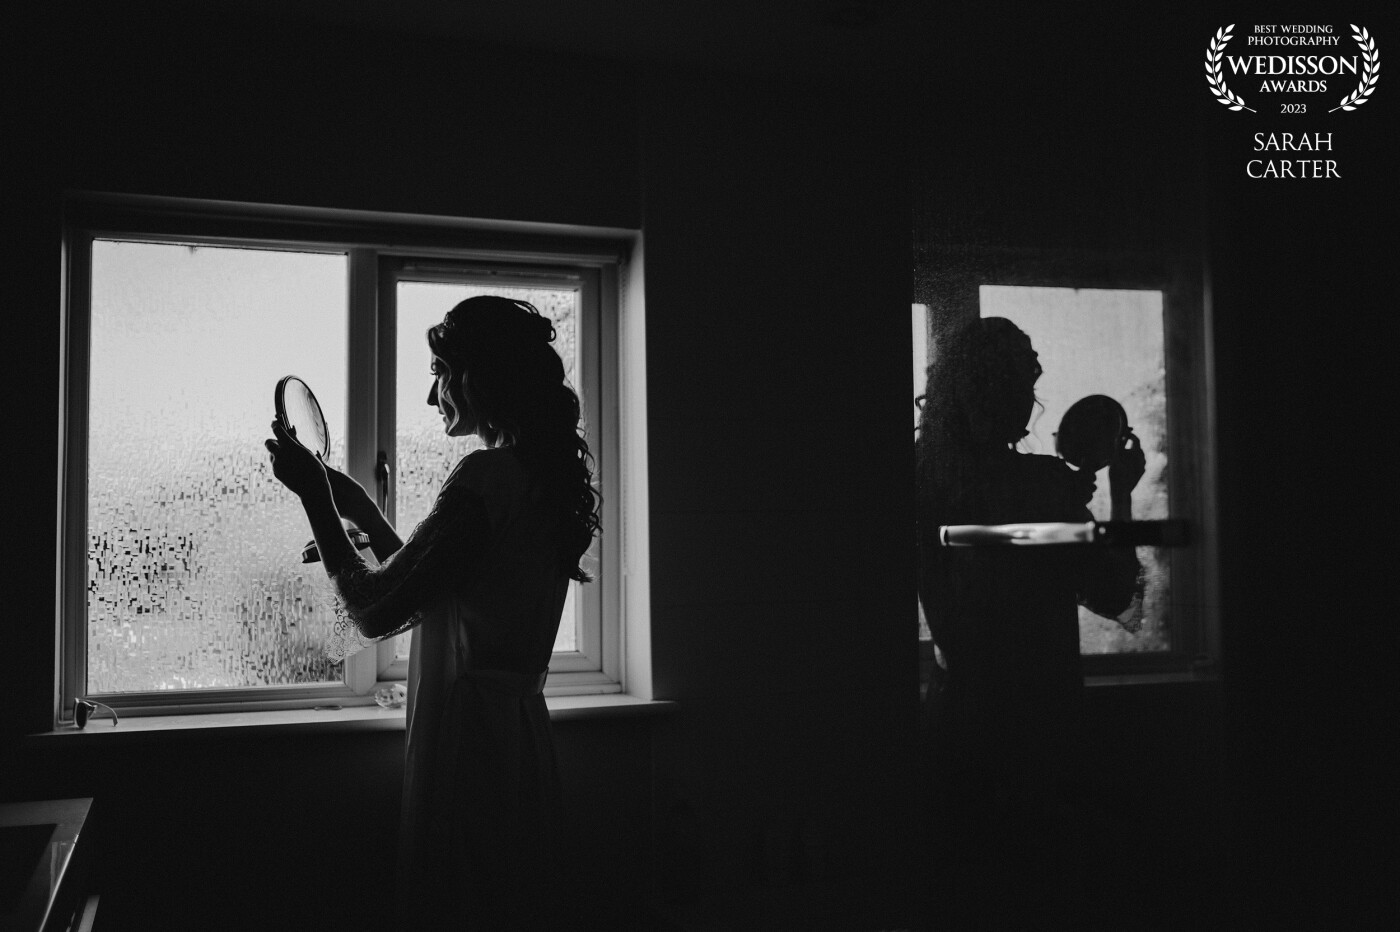 This was shot just before Izzy was putting on her wedding dress. The last minute make up check. Her reflection in the shower door is what caught my eye and I love how this image turned out.